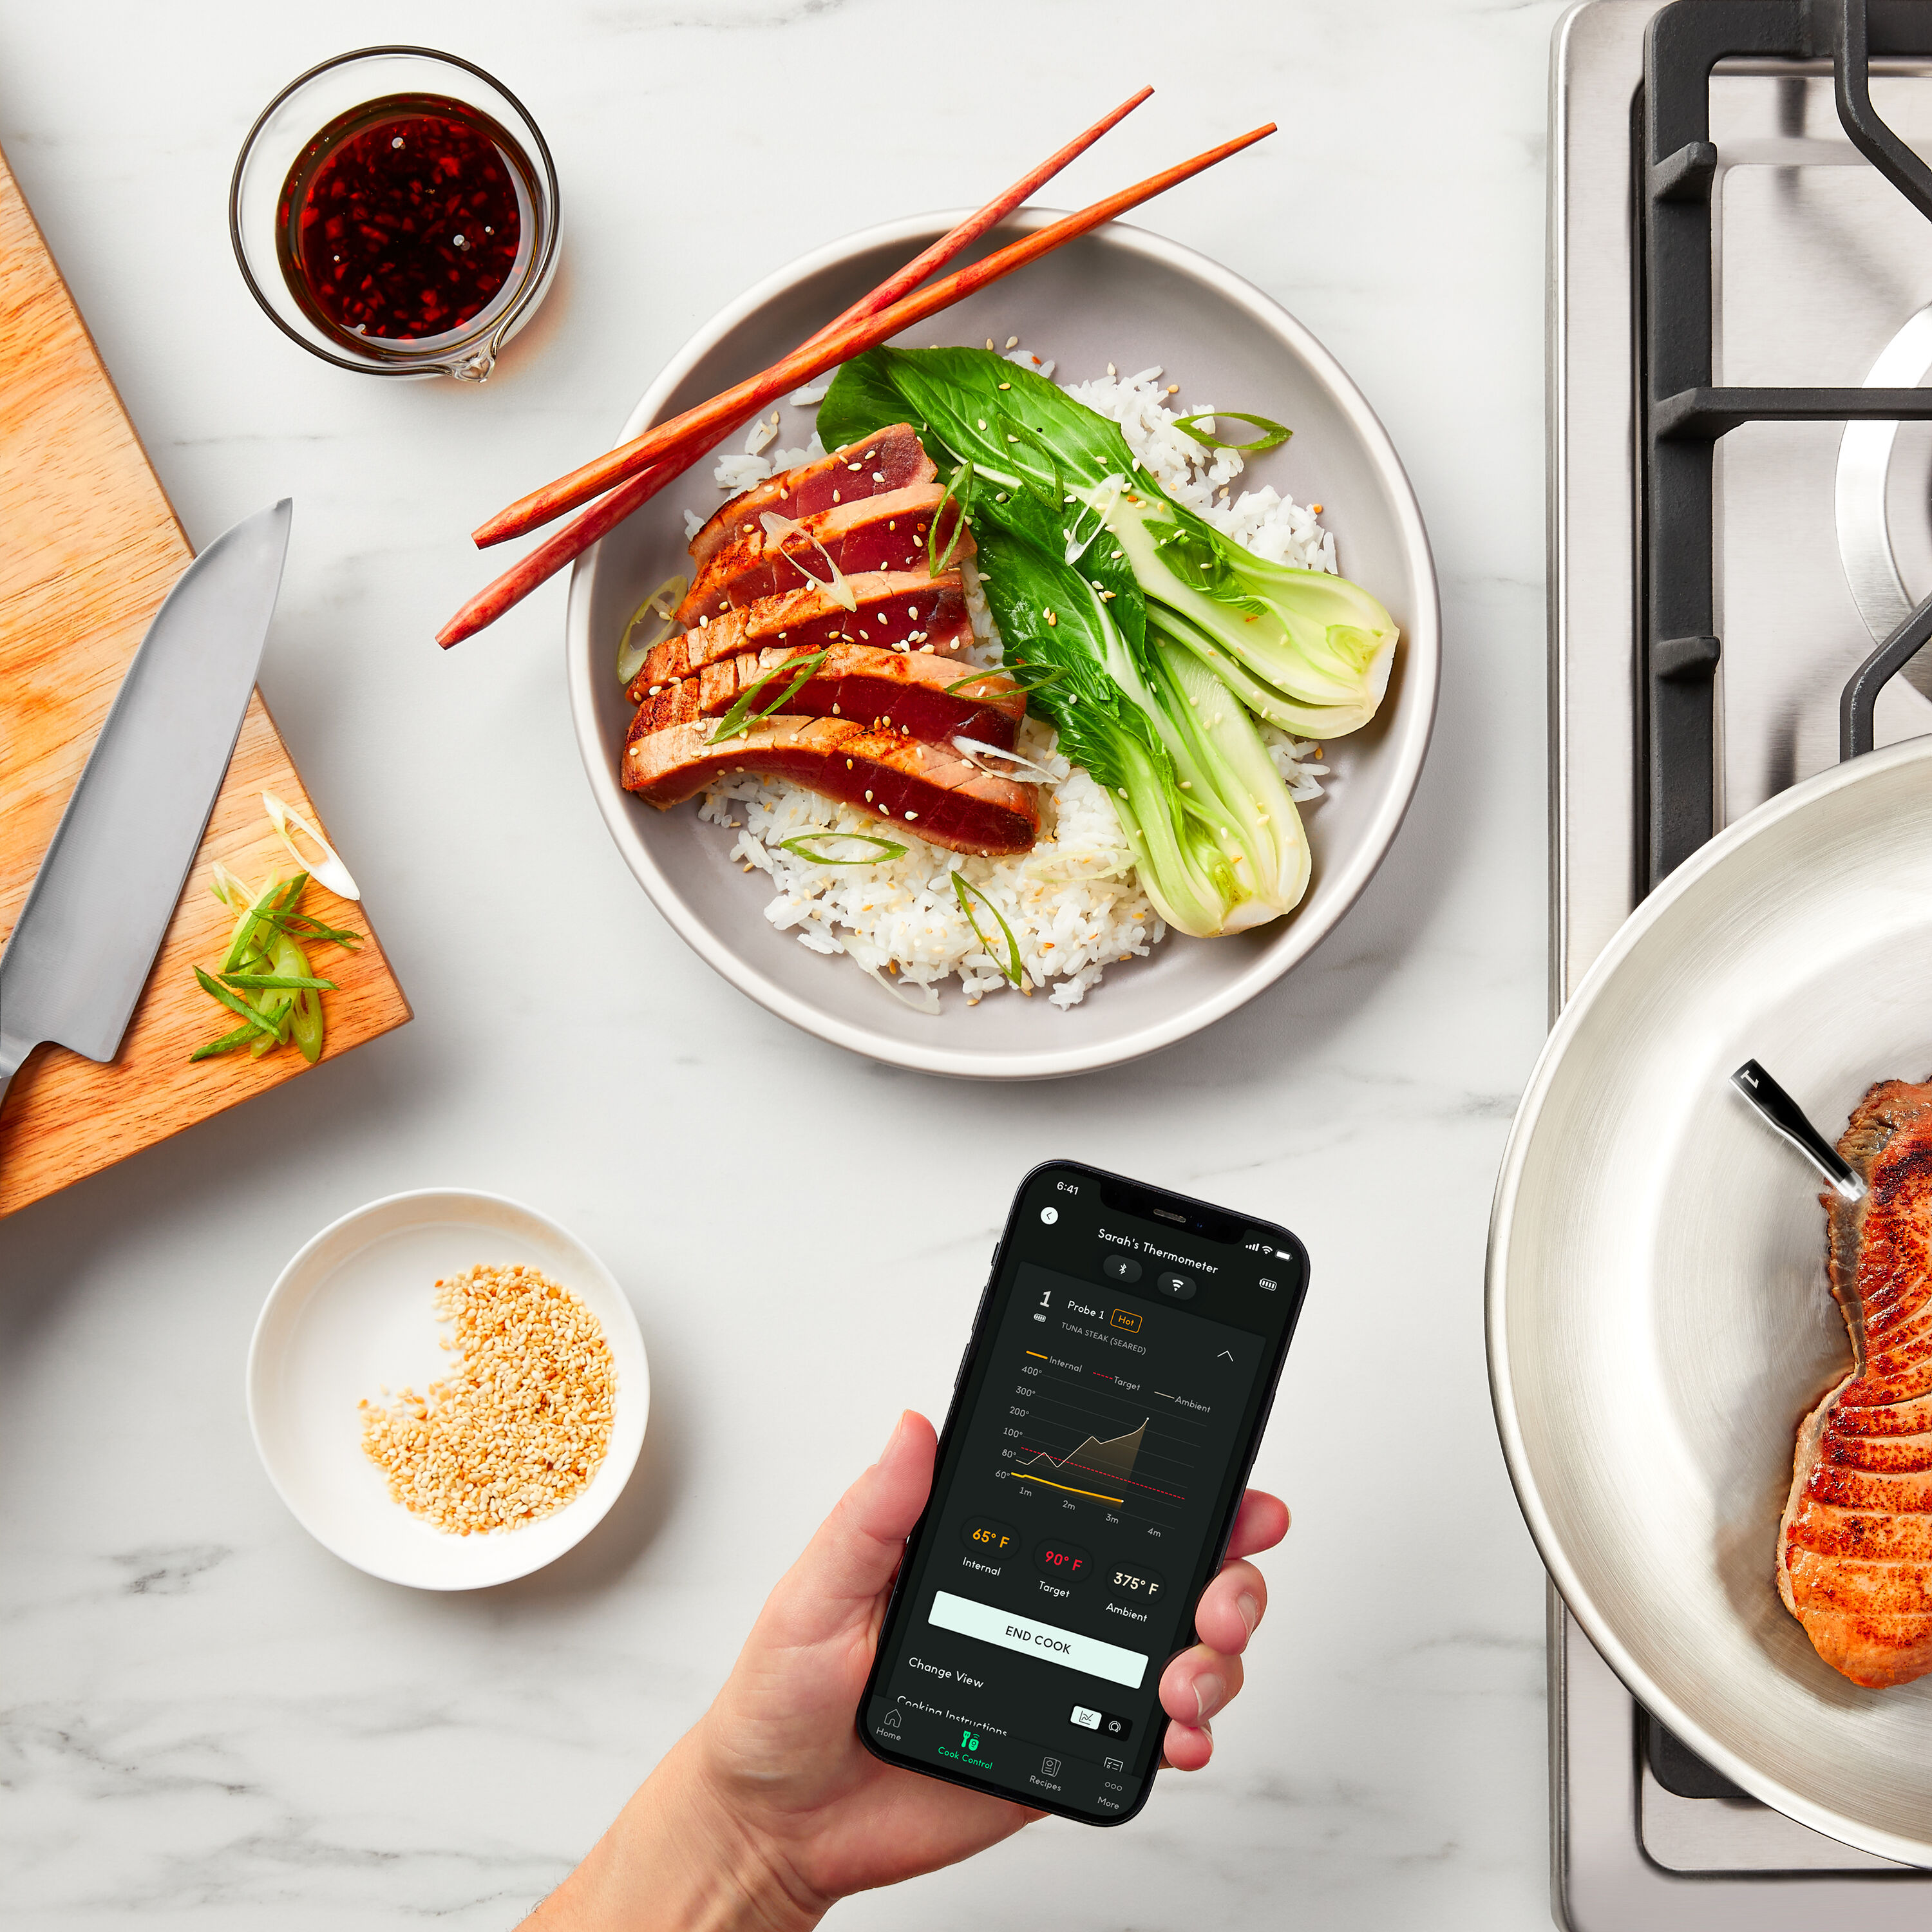 Chef iQ's Smart Thermometer Packaging  Dieline - Design, Branding &  Packaging Inspiration